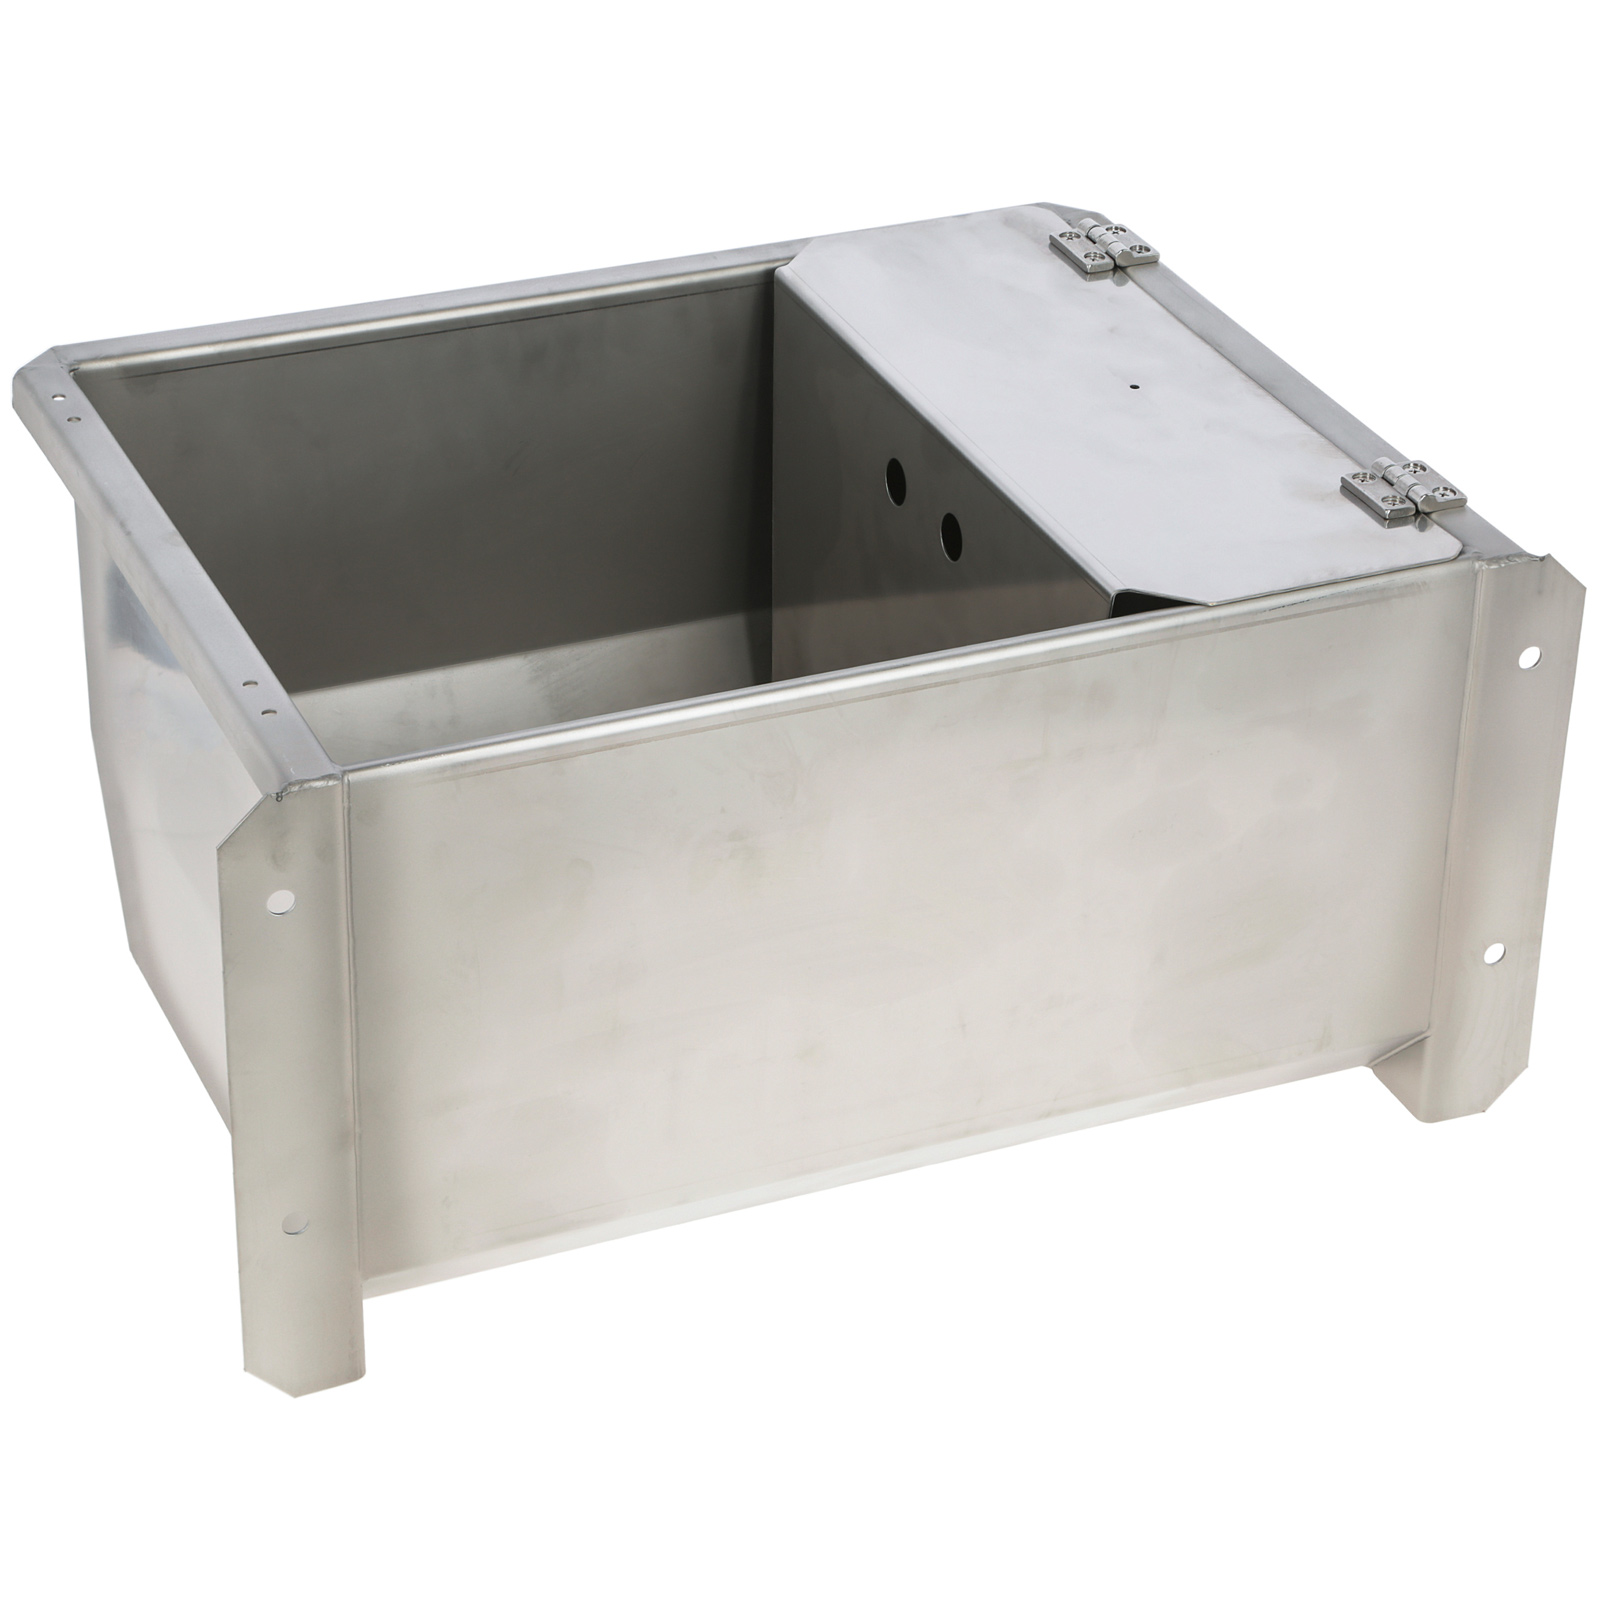 Trough drinker stainless steel 60 x 42,5 x 29 cm 35 L Without heating